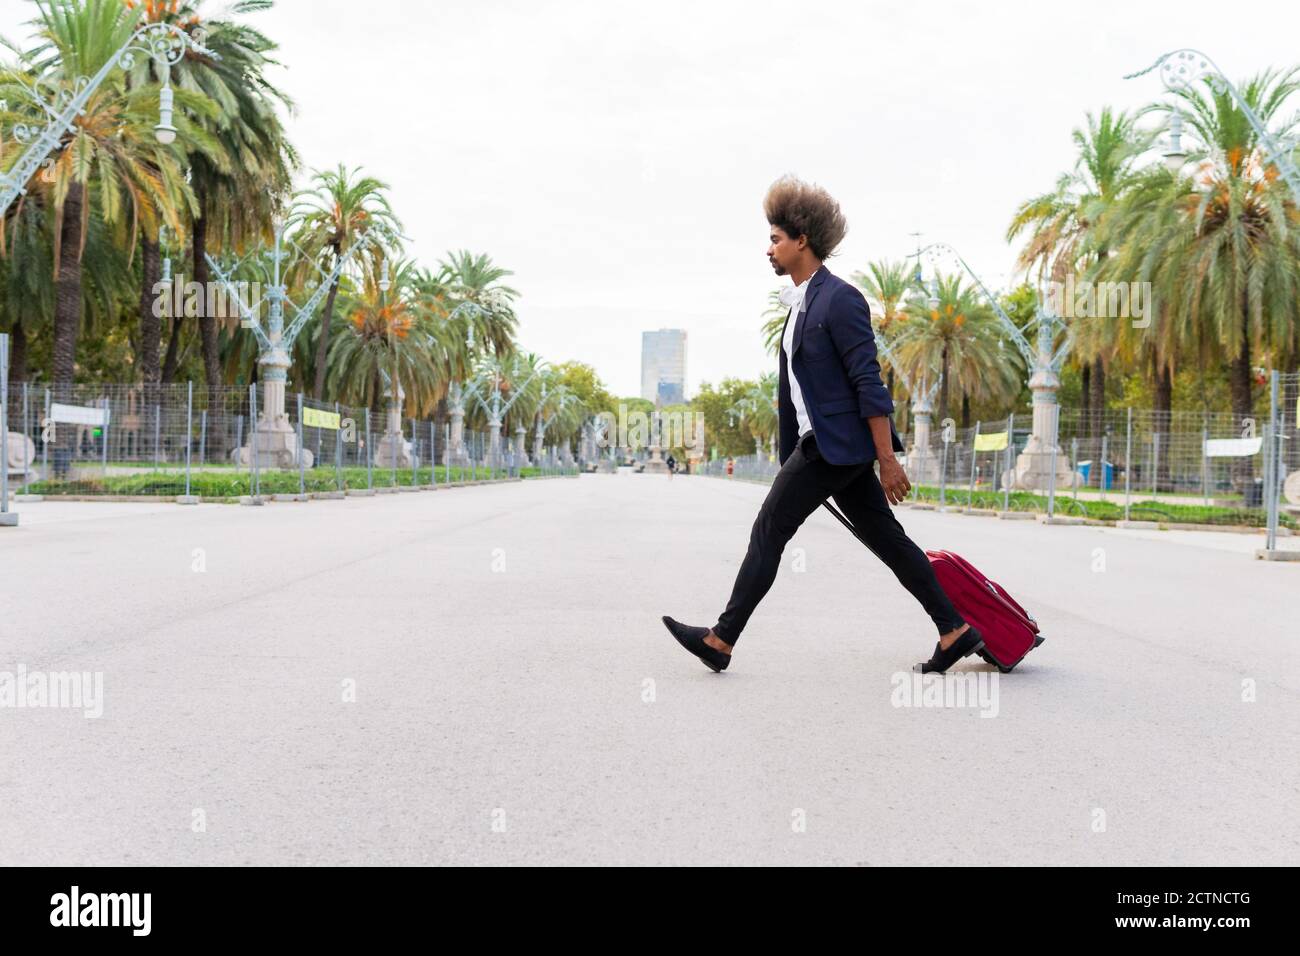 Side view of a young black man in a suit dragging a wheeled suitcase down the street on a tree-lined avenue Stock Photo